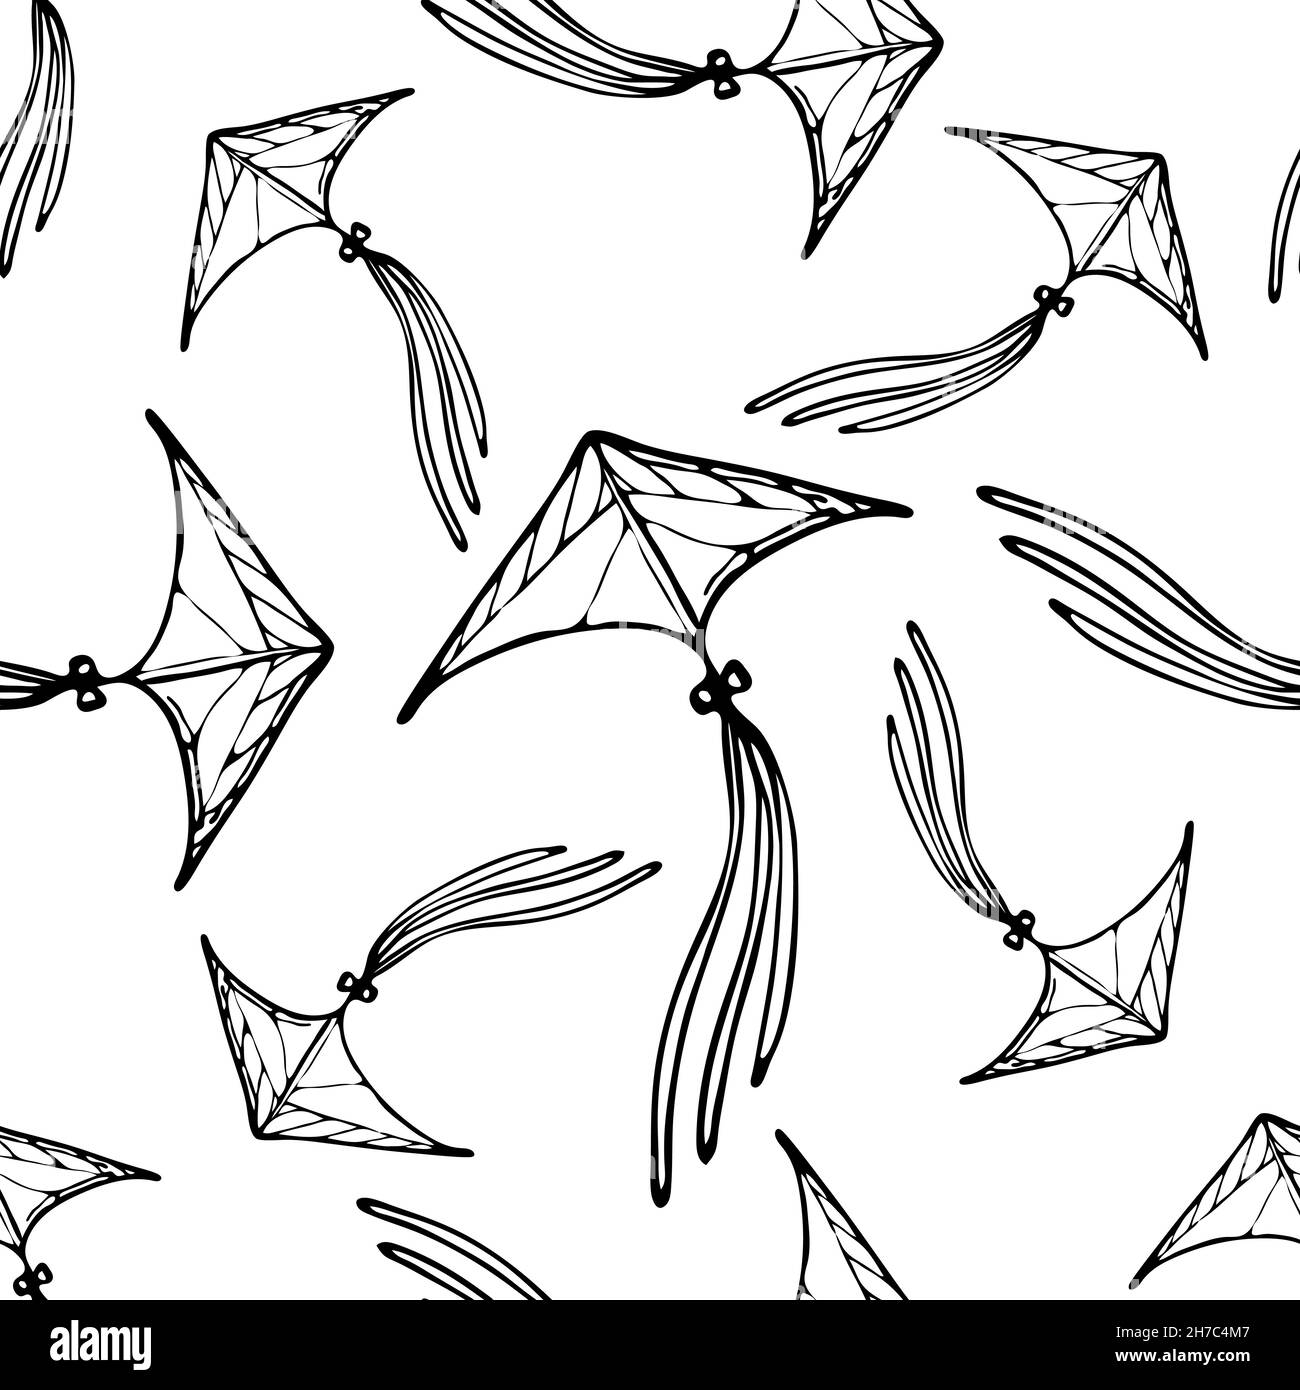 Kite vector seamless pattern doodle, hand drawn, minimalistic, monochrome. Black and white background Stock Vector